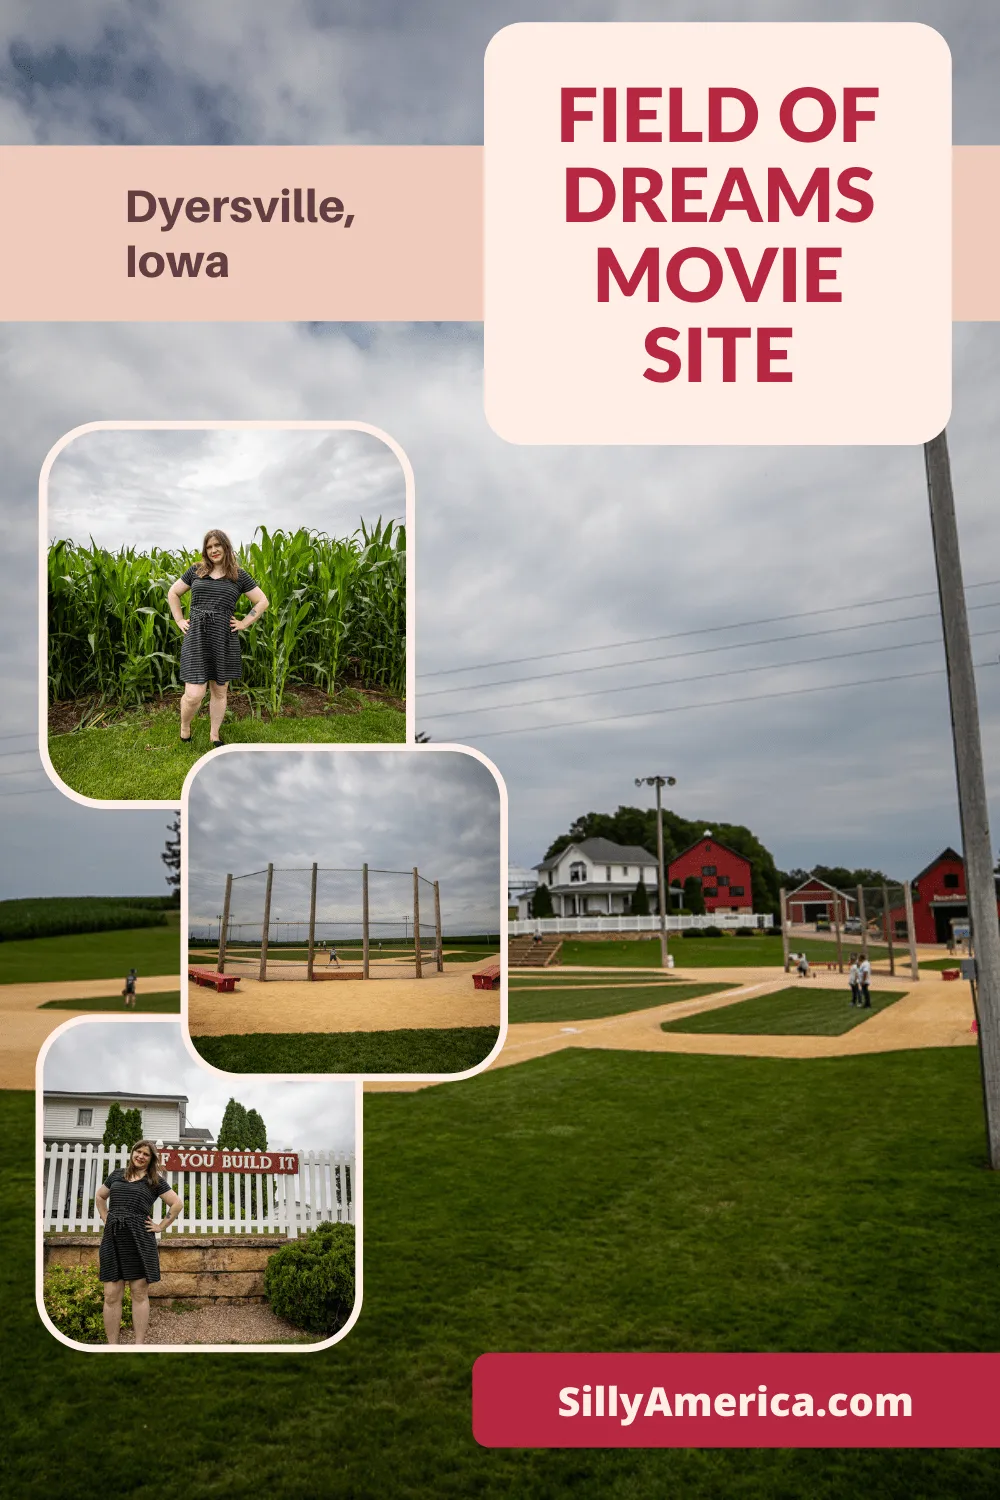 The iconic movie line goes, “If you build it he will come.” And on this Iowa farm they actually built it and over 30 years later, tourists are still coming to check out the Field of Dreams movie site in Dyersville, Iowa.   #movie #fieldofdreams #IowaRoadsideAttractions #IowaRoadsideAttraction #RoadsideAttractions #RoadsideAttraction #RoadTrip #IowaRoadTrip #IowaThingsToDo #IowaRoadTripBucketLists #IowaBucketList #IowaRoadTripIdeas #IowaTravel